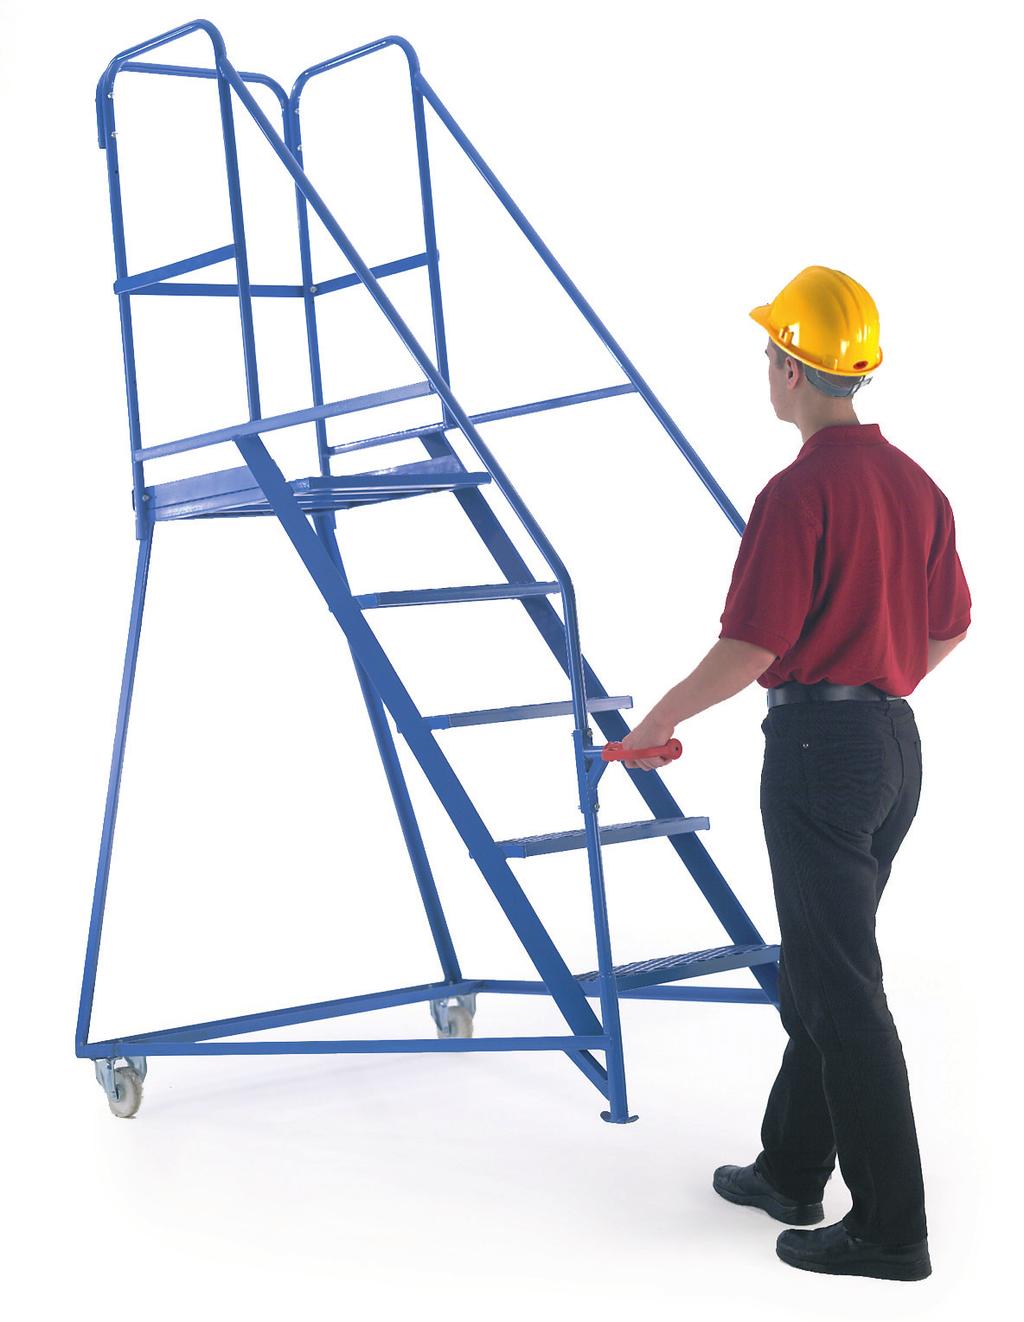 Fort Tilt N Push Steps Fort Tilt N Push Steps Standard or GS approved versions available Features a large working top platform: